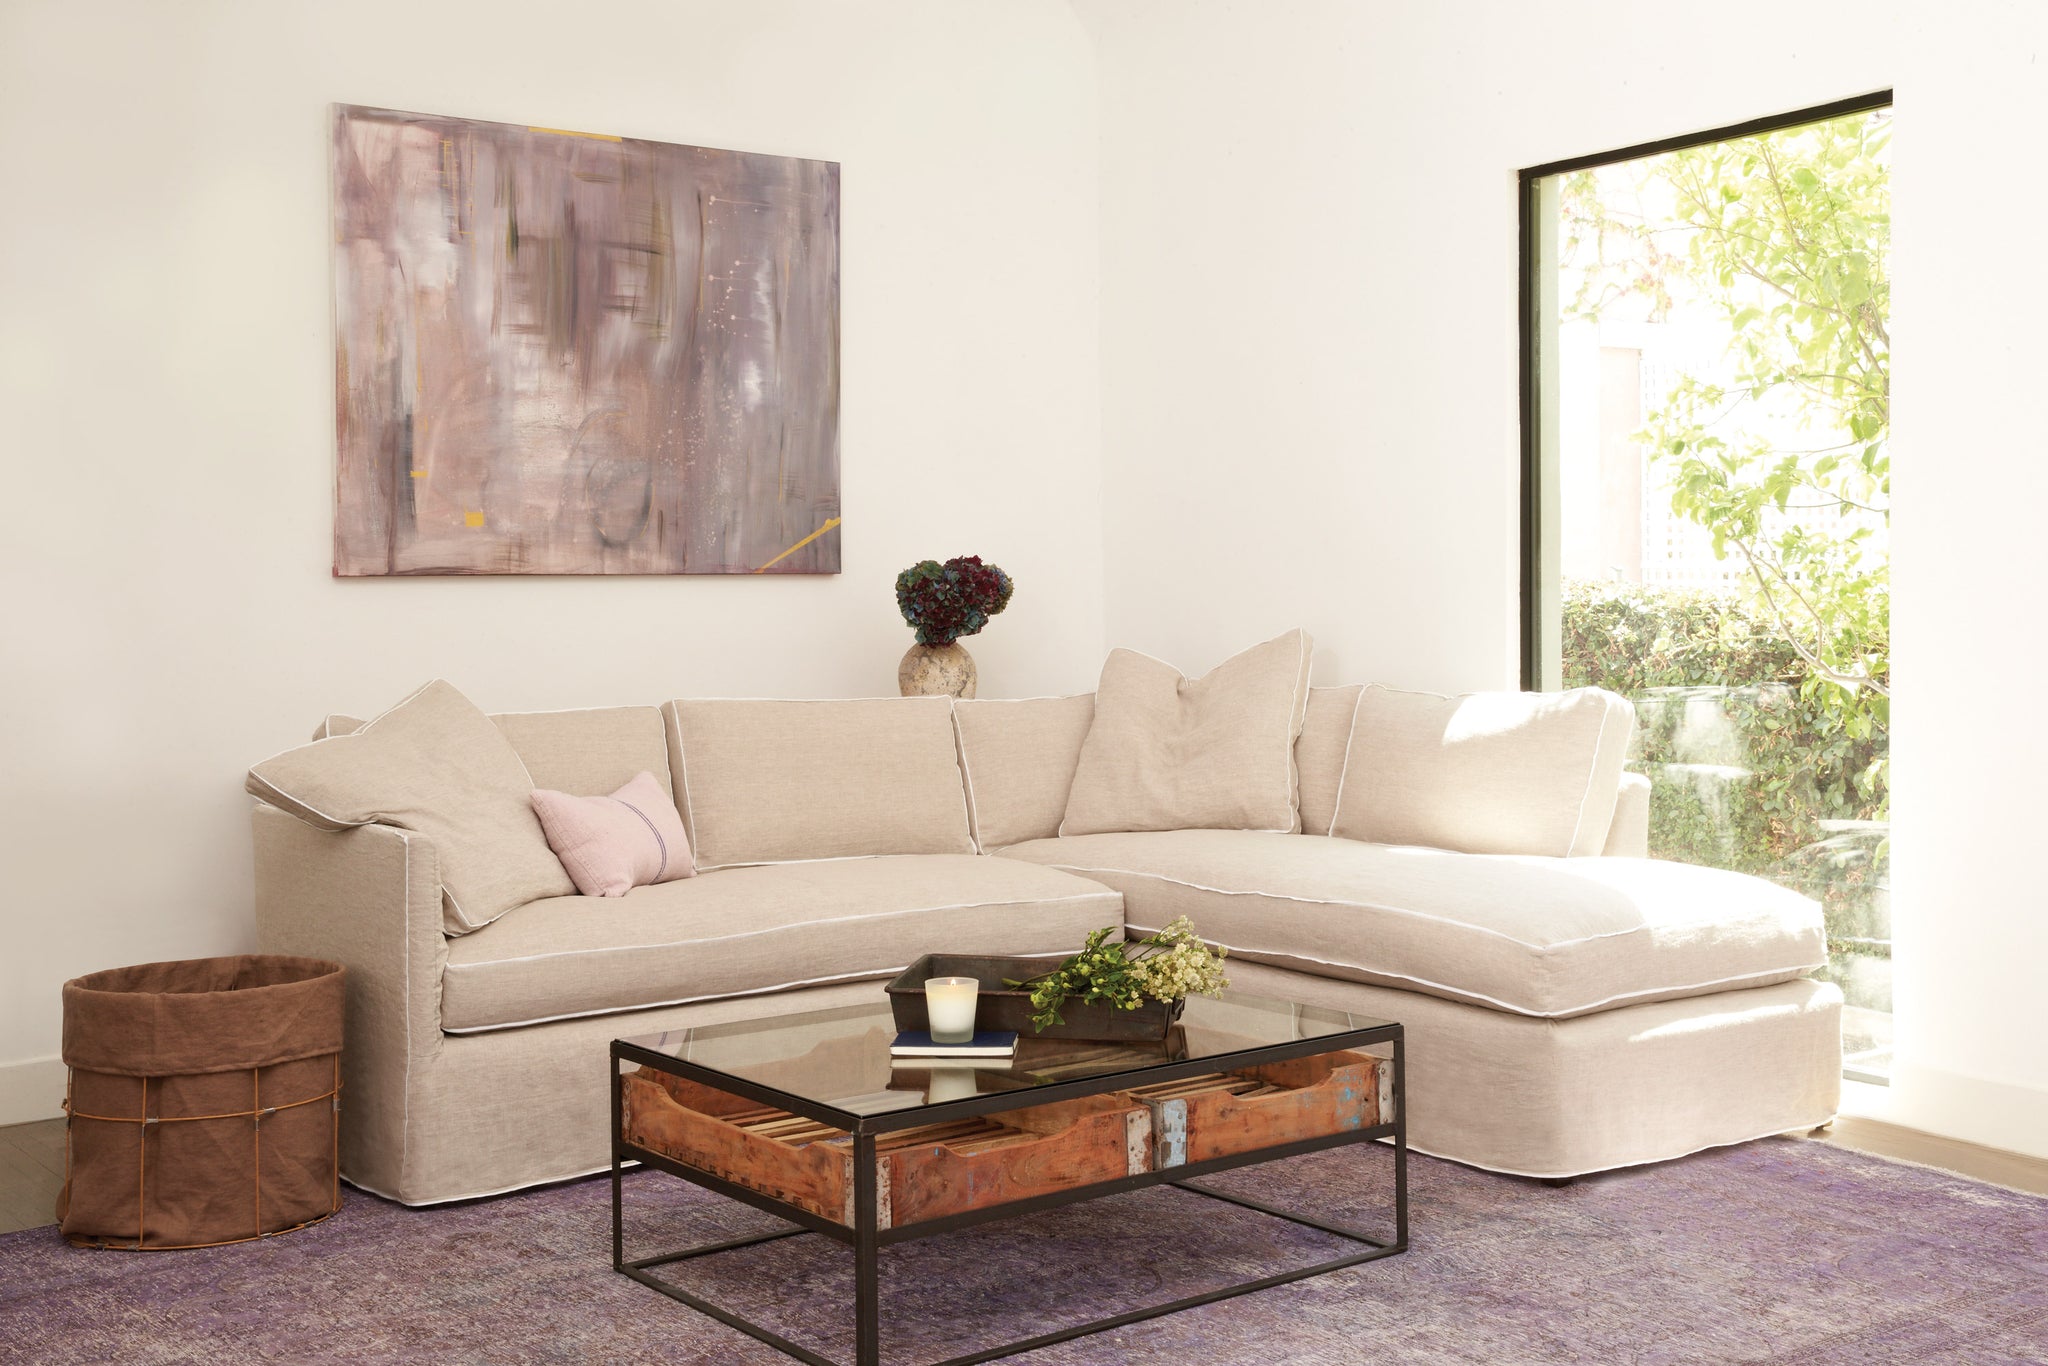  Renata Sectional in Logan Oatmeal with Logan White Flat Welt next to a glass coffee table. IN the background we see a single painting on the wall. Underneath the sectional is a dark colored rug. Photographed in Logan Oatmeal. 